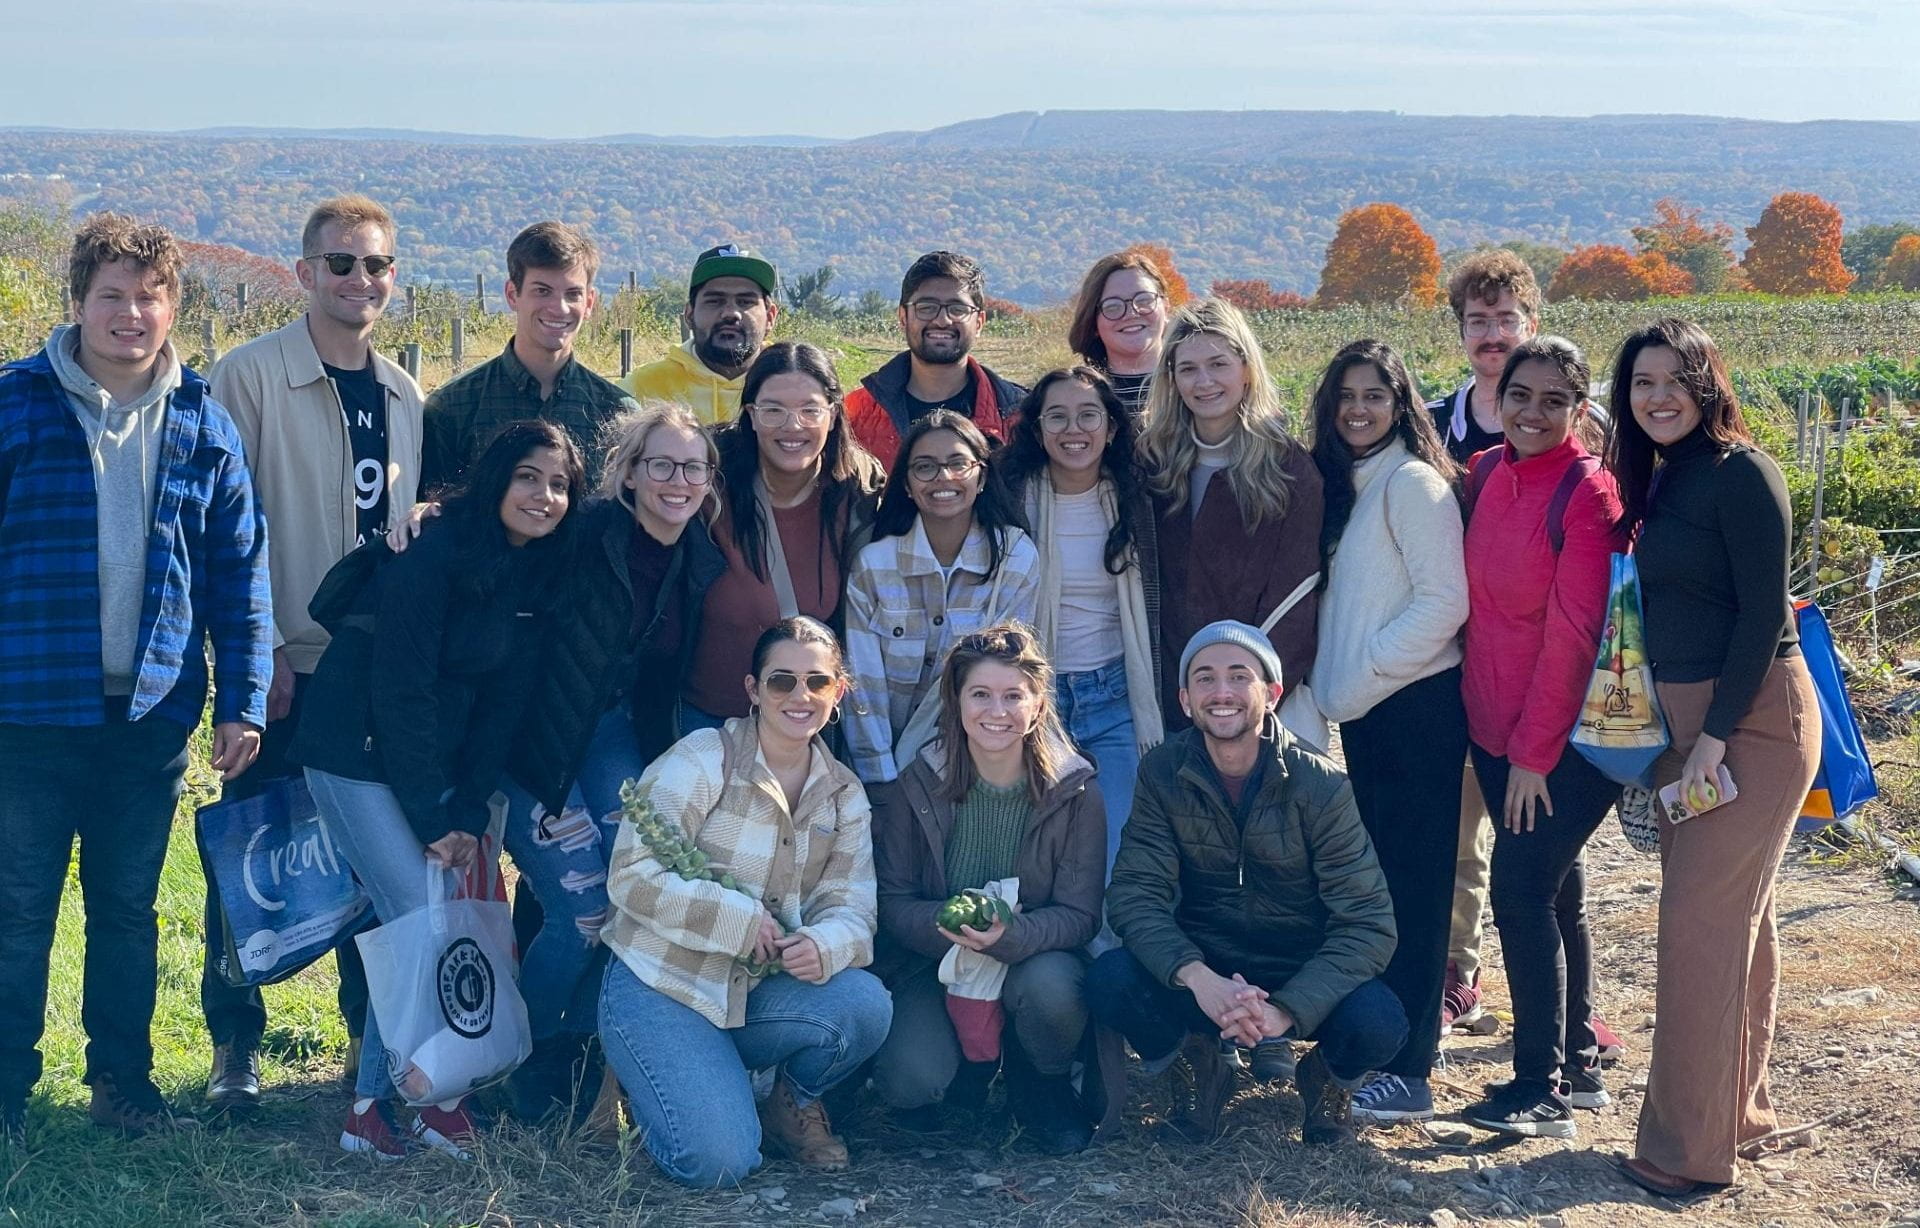 Group of MPH students at an apple picking event